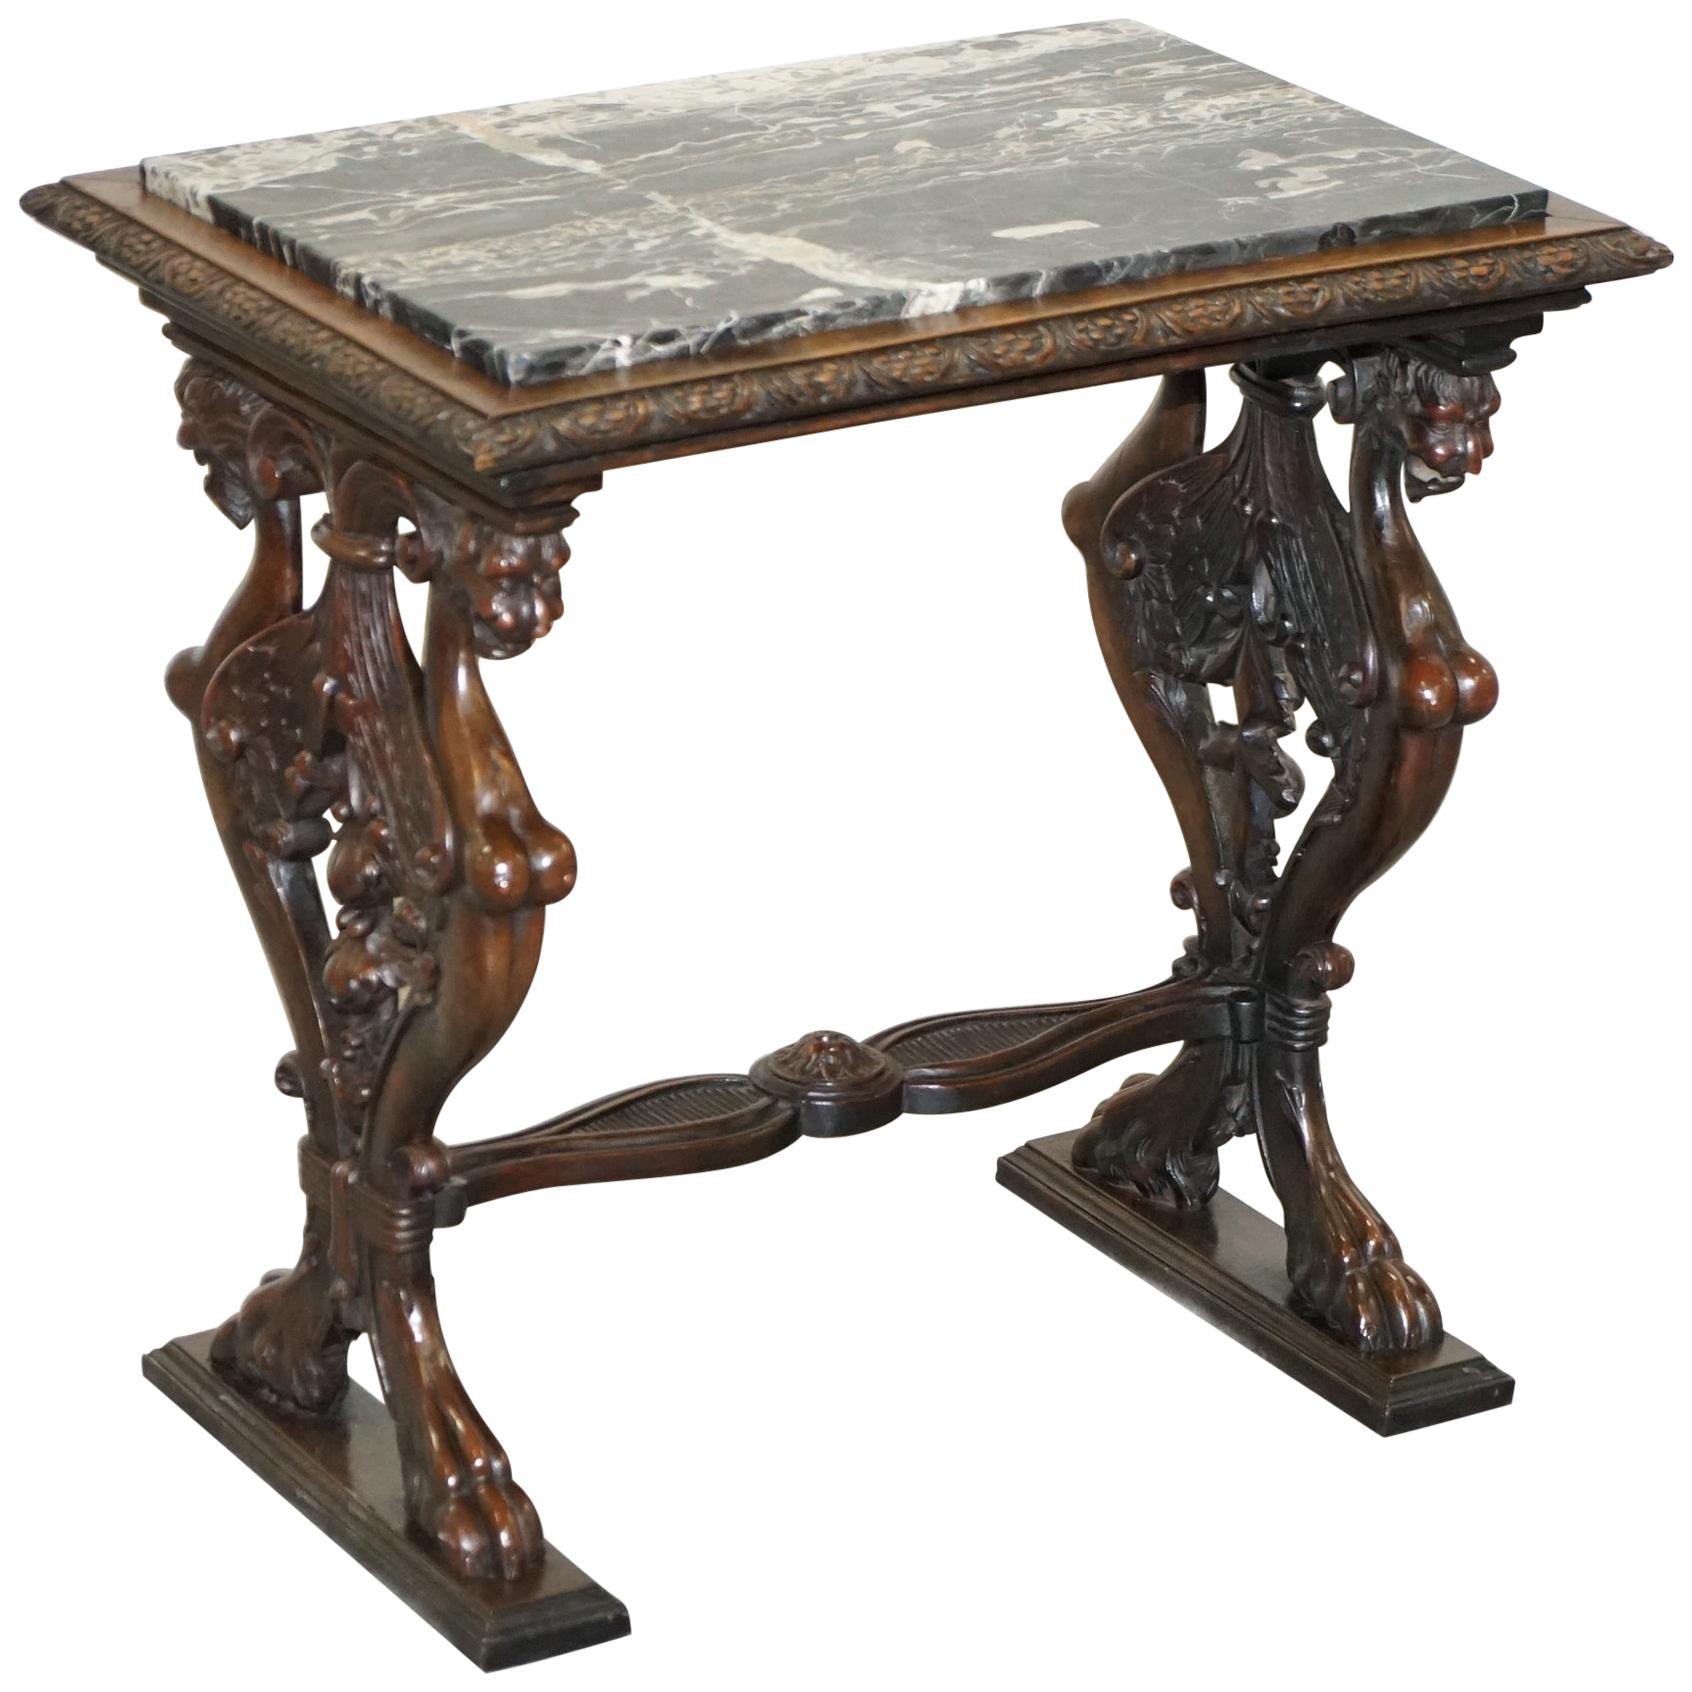 Italian circa 1840 Ornately Hand Carved Oak Side Table with Solid Marble Top